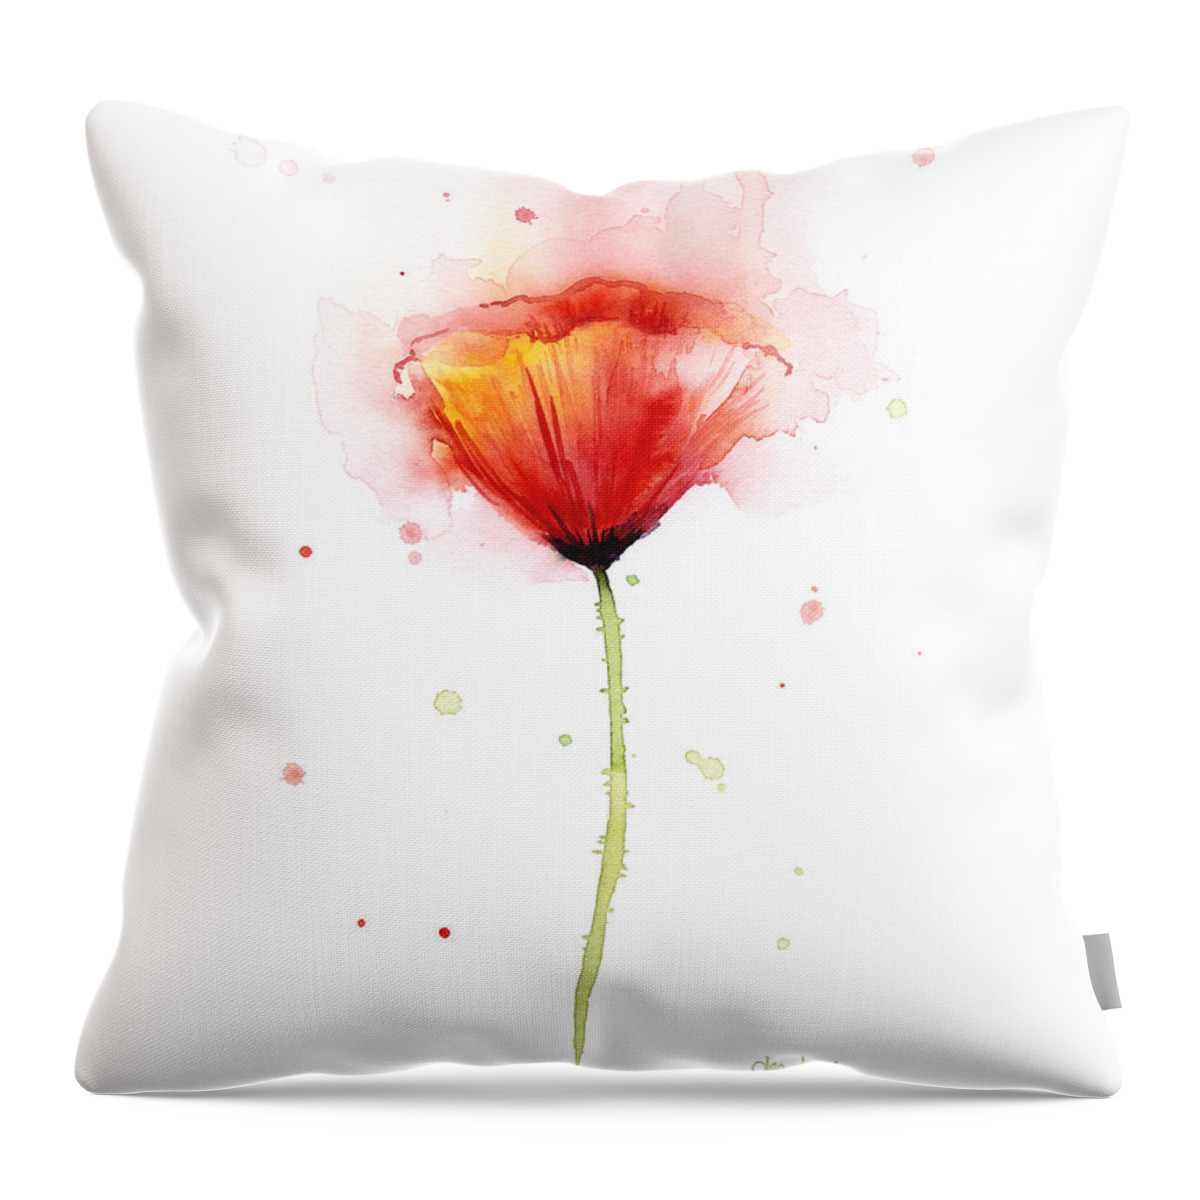 Watercolor Throw Pillow featuring the painting Poppy Watercolor Red Abstract Flower by Olga Shvartsur